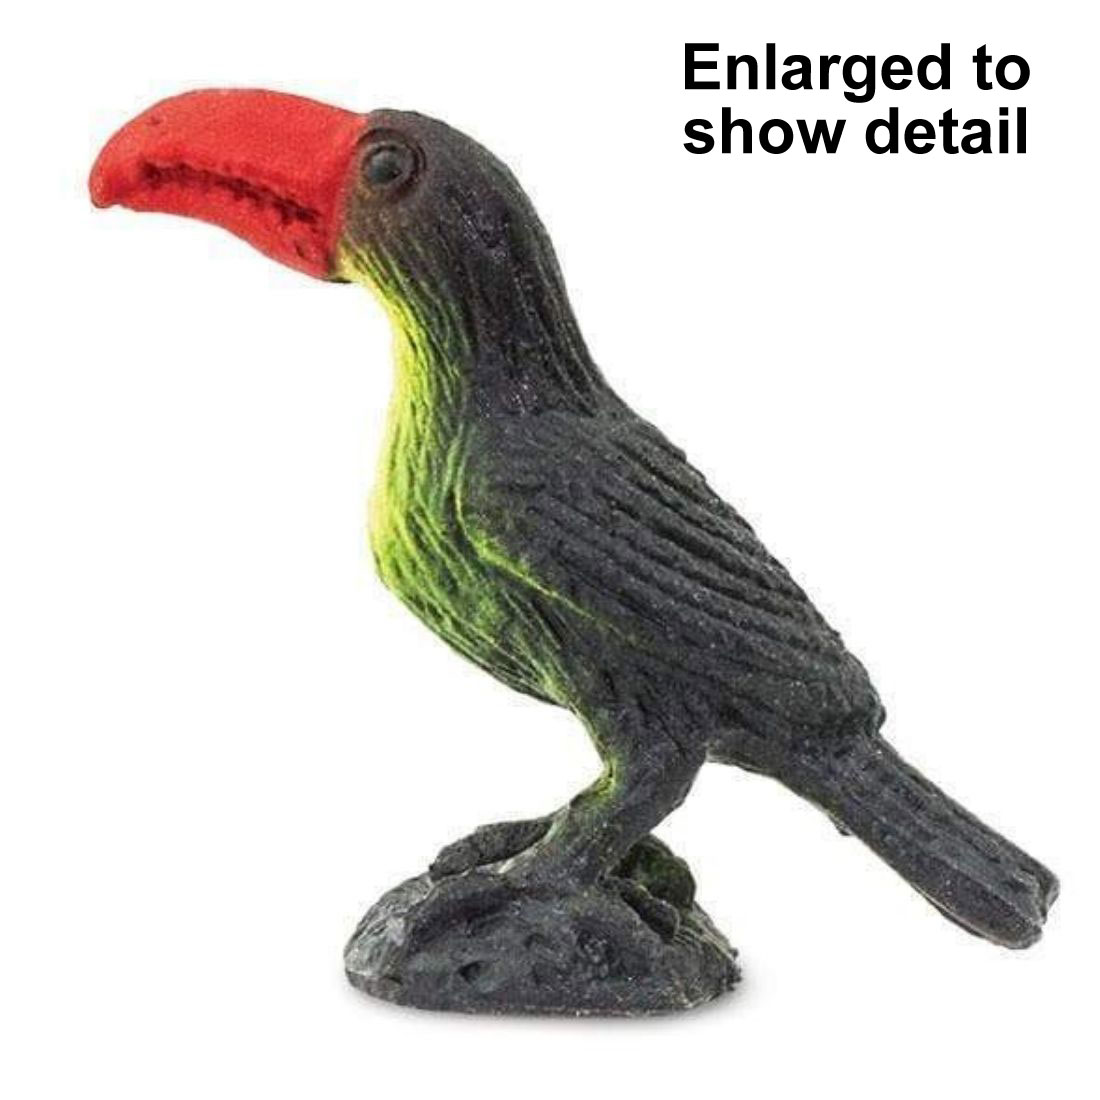 Toucan Good Luck Mini Figurine with the text Enlarged to Show Detail